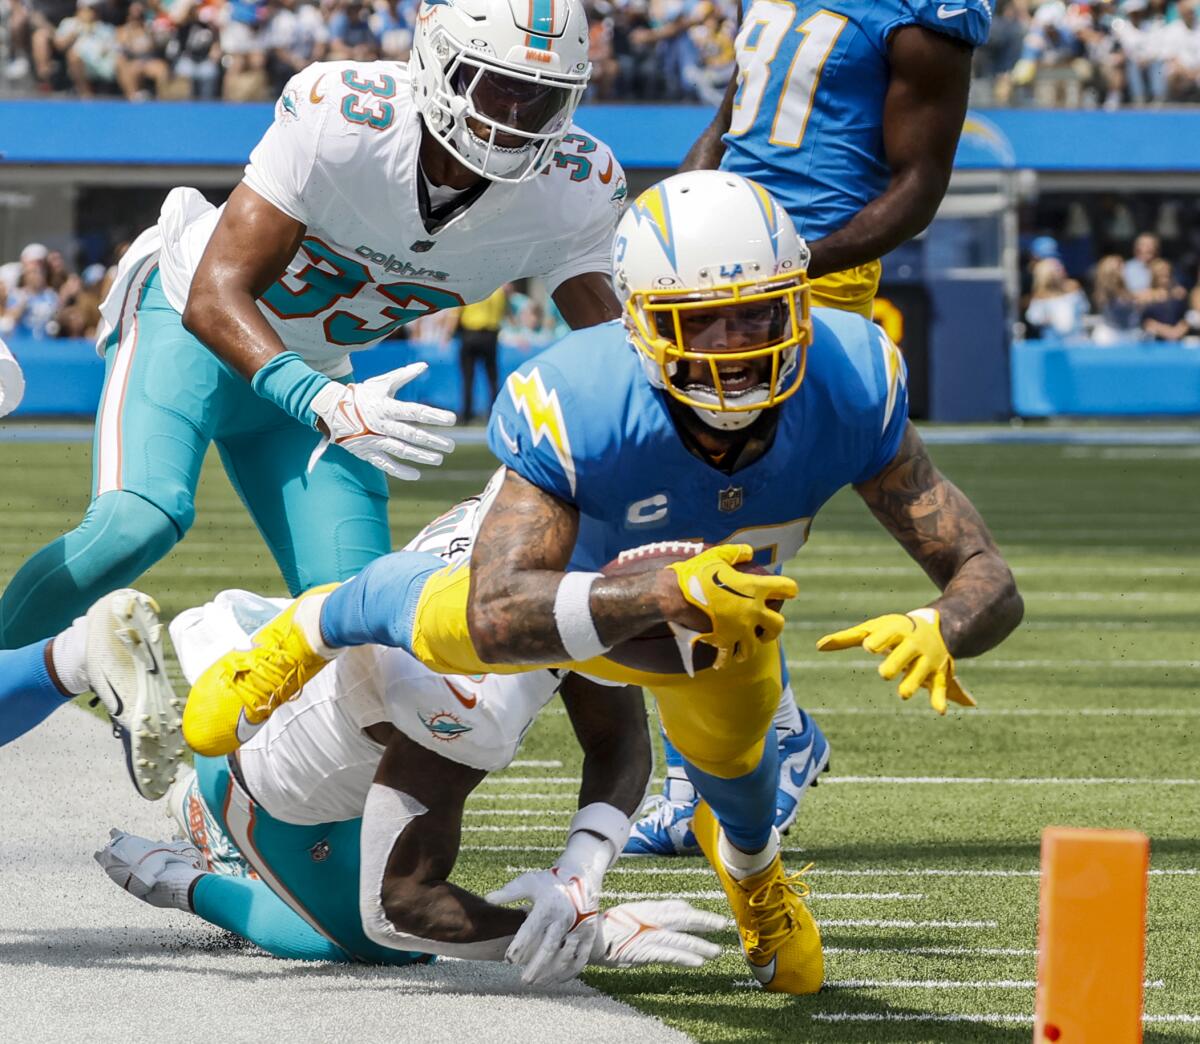 Chargers wide receiver Keenan Allen strains to gain yards against the Miami Dolphins at SoFi Stadium in September.